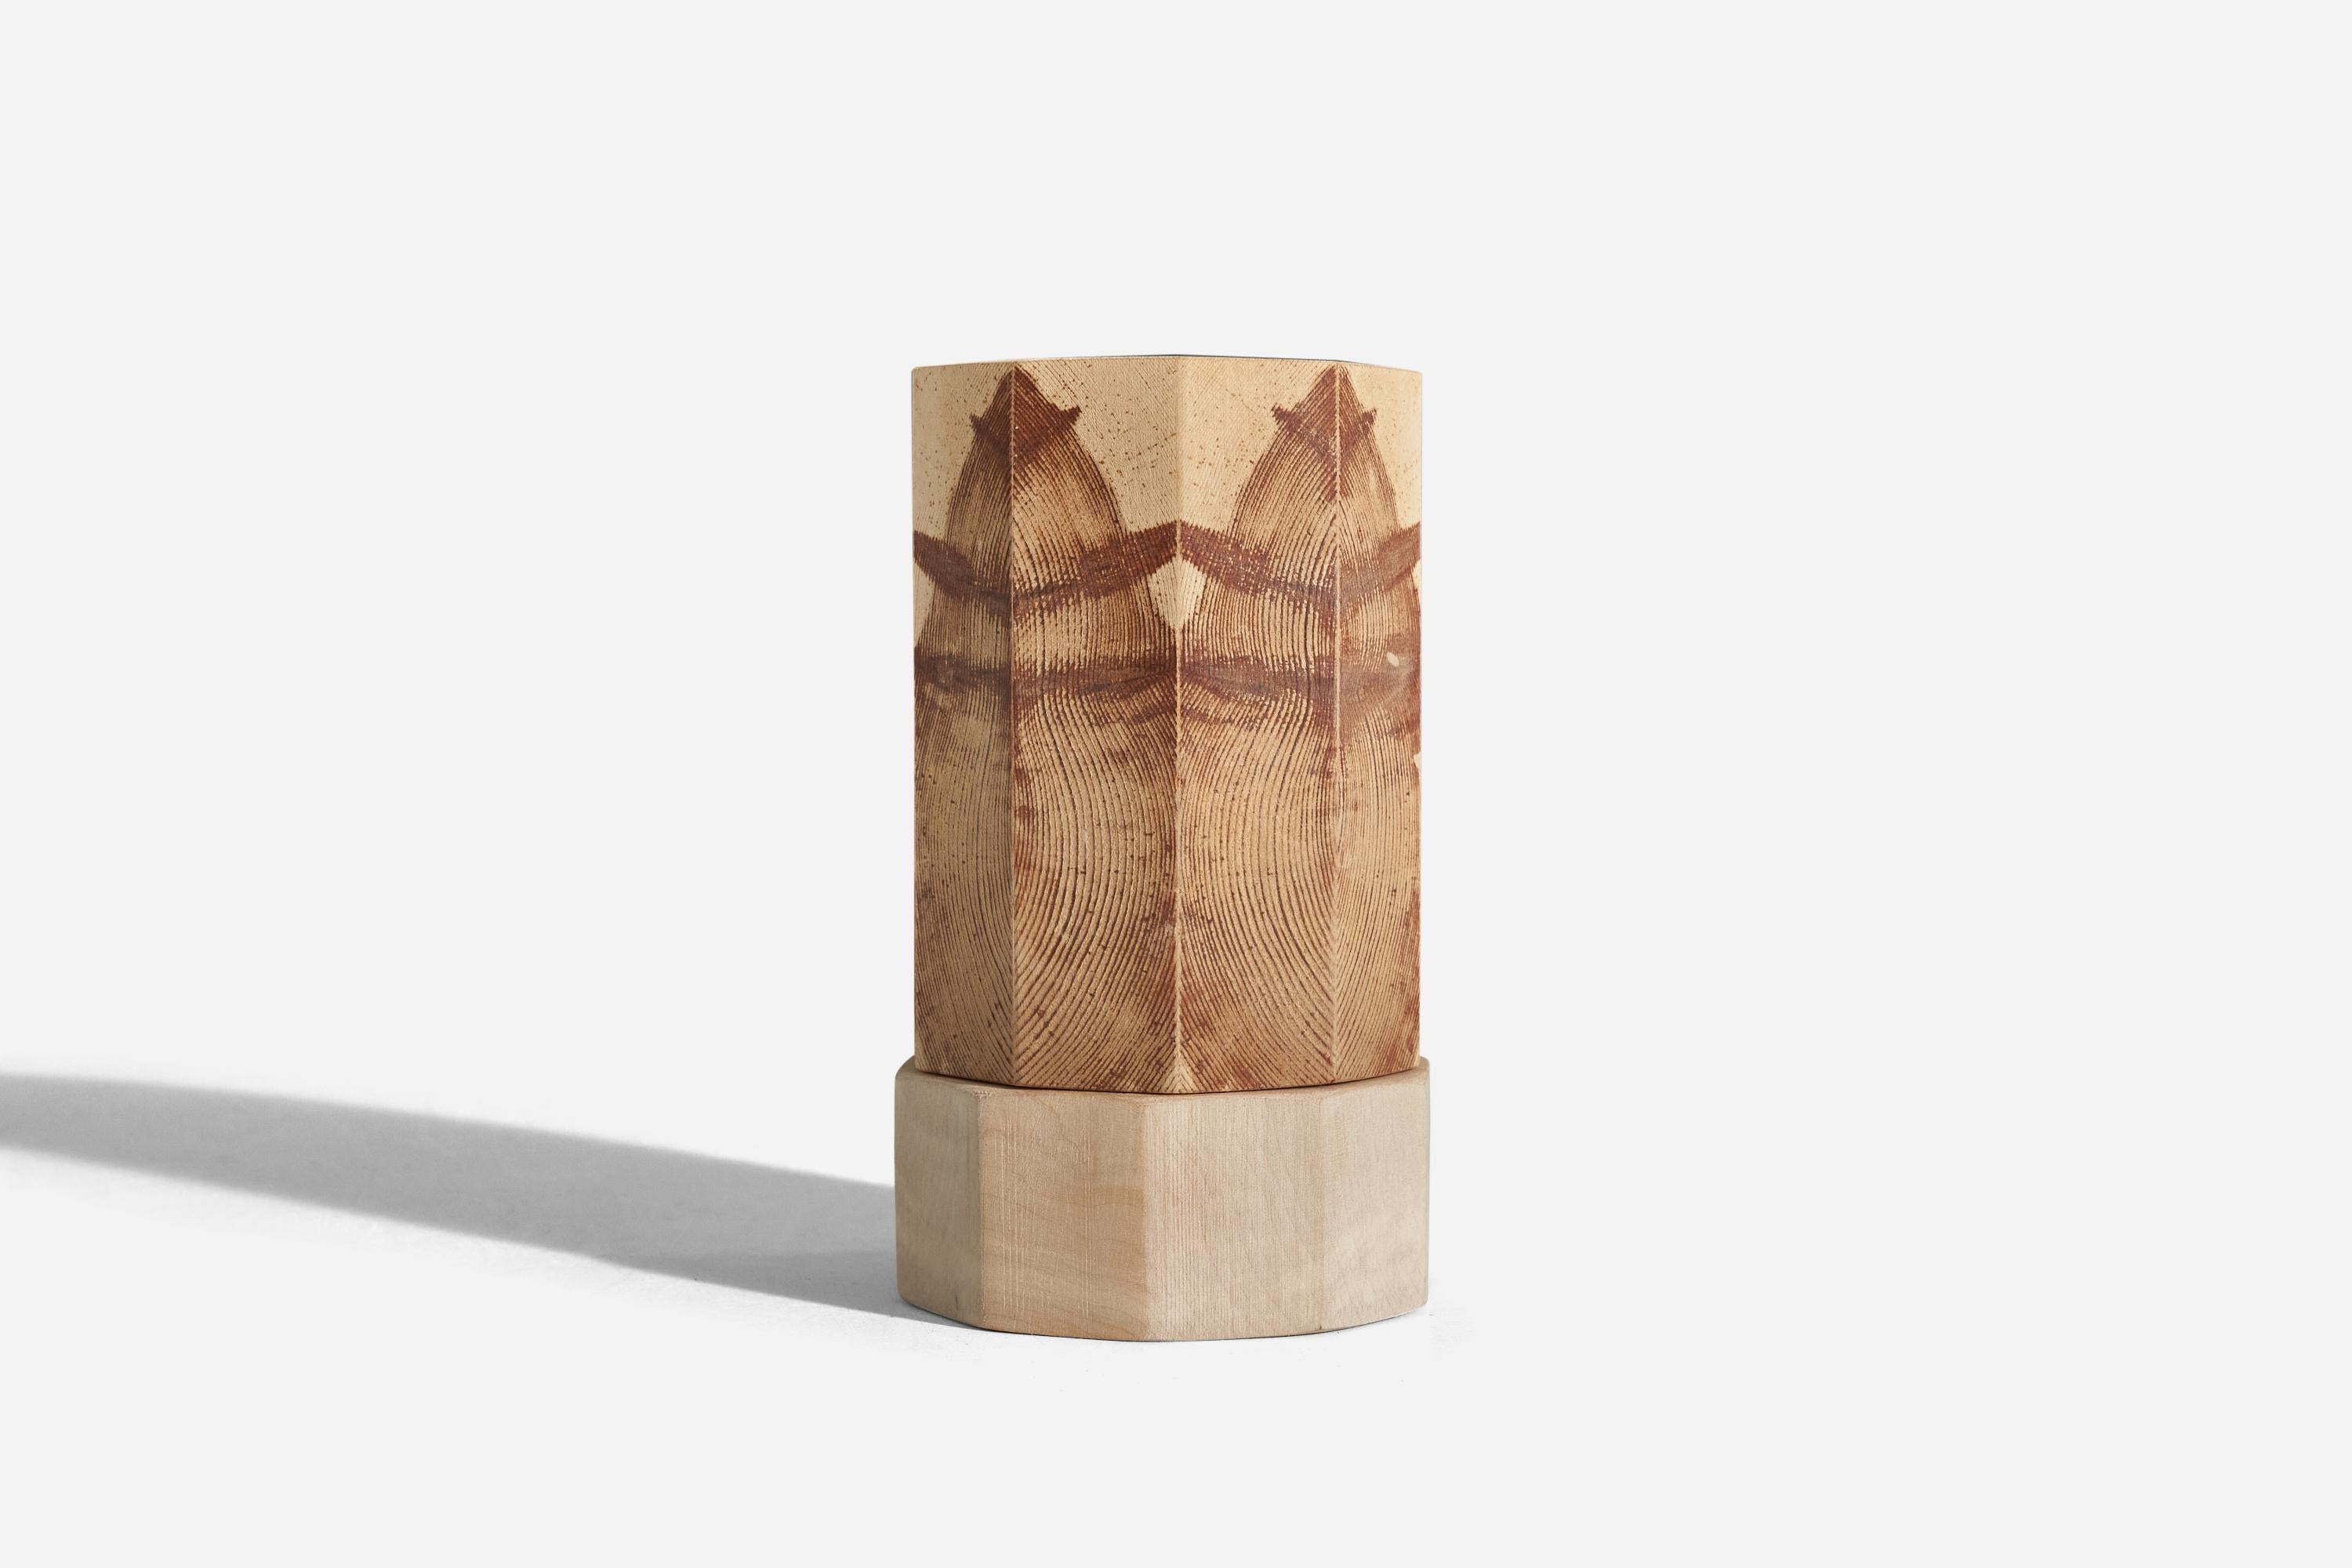 A wooden table lamp designed and produced in Sweden, 1970s.

